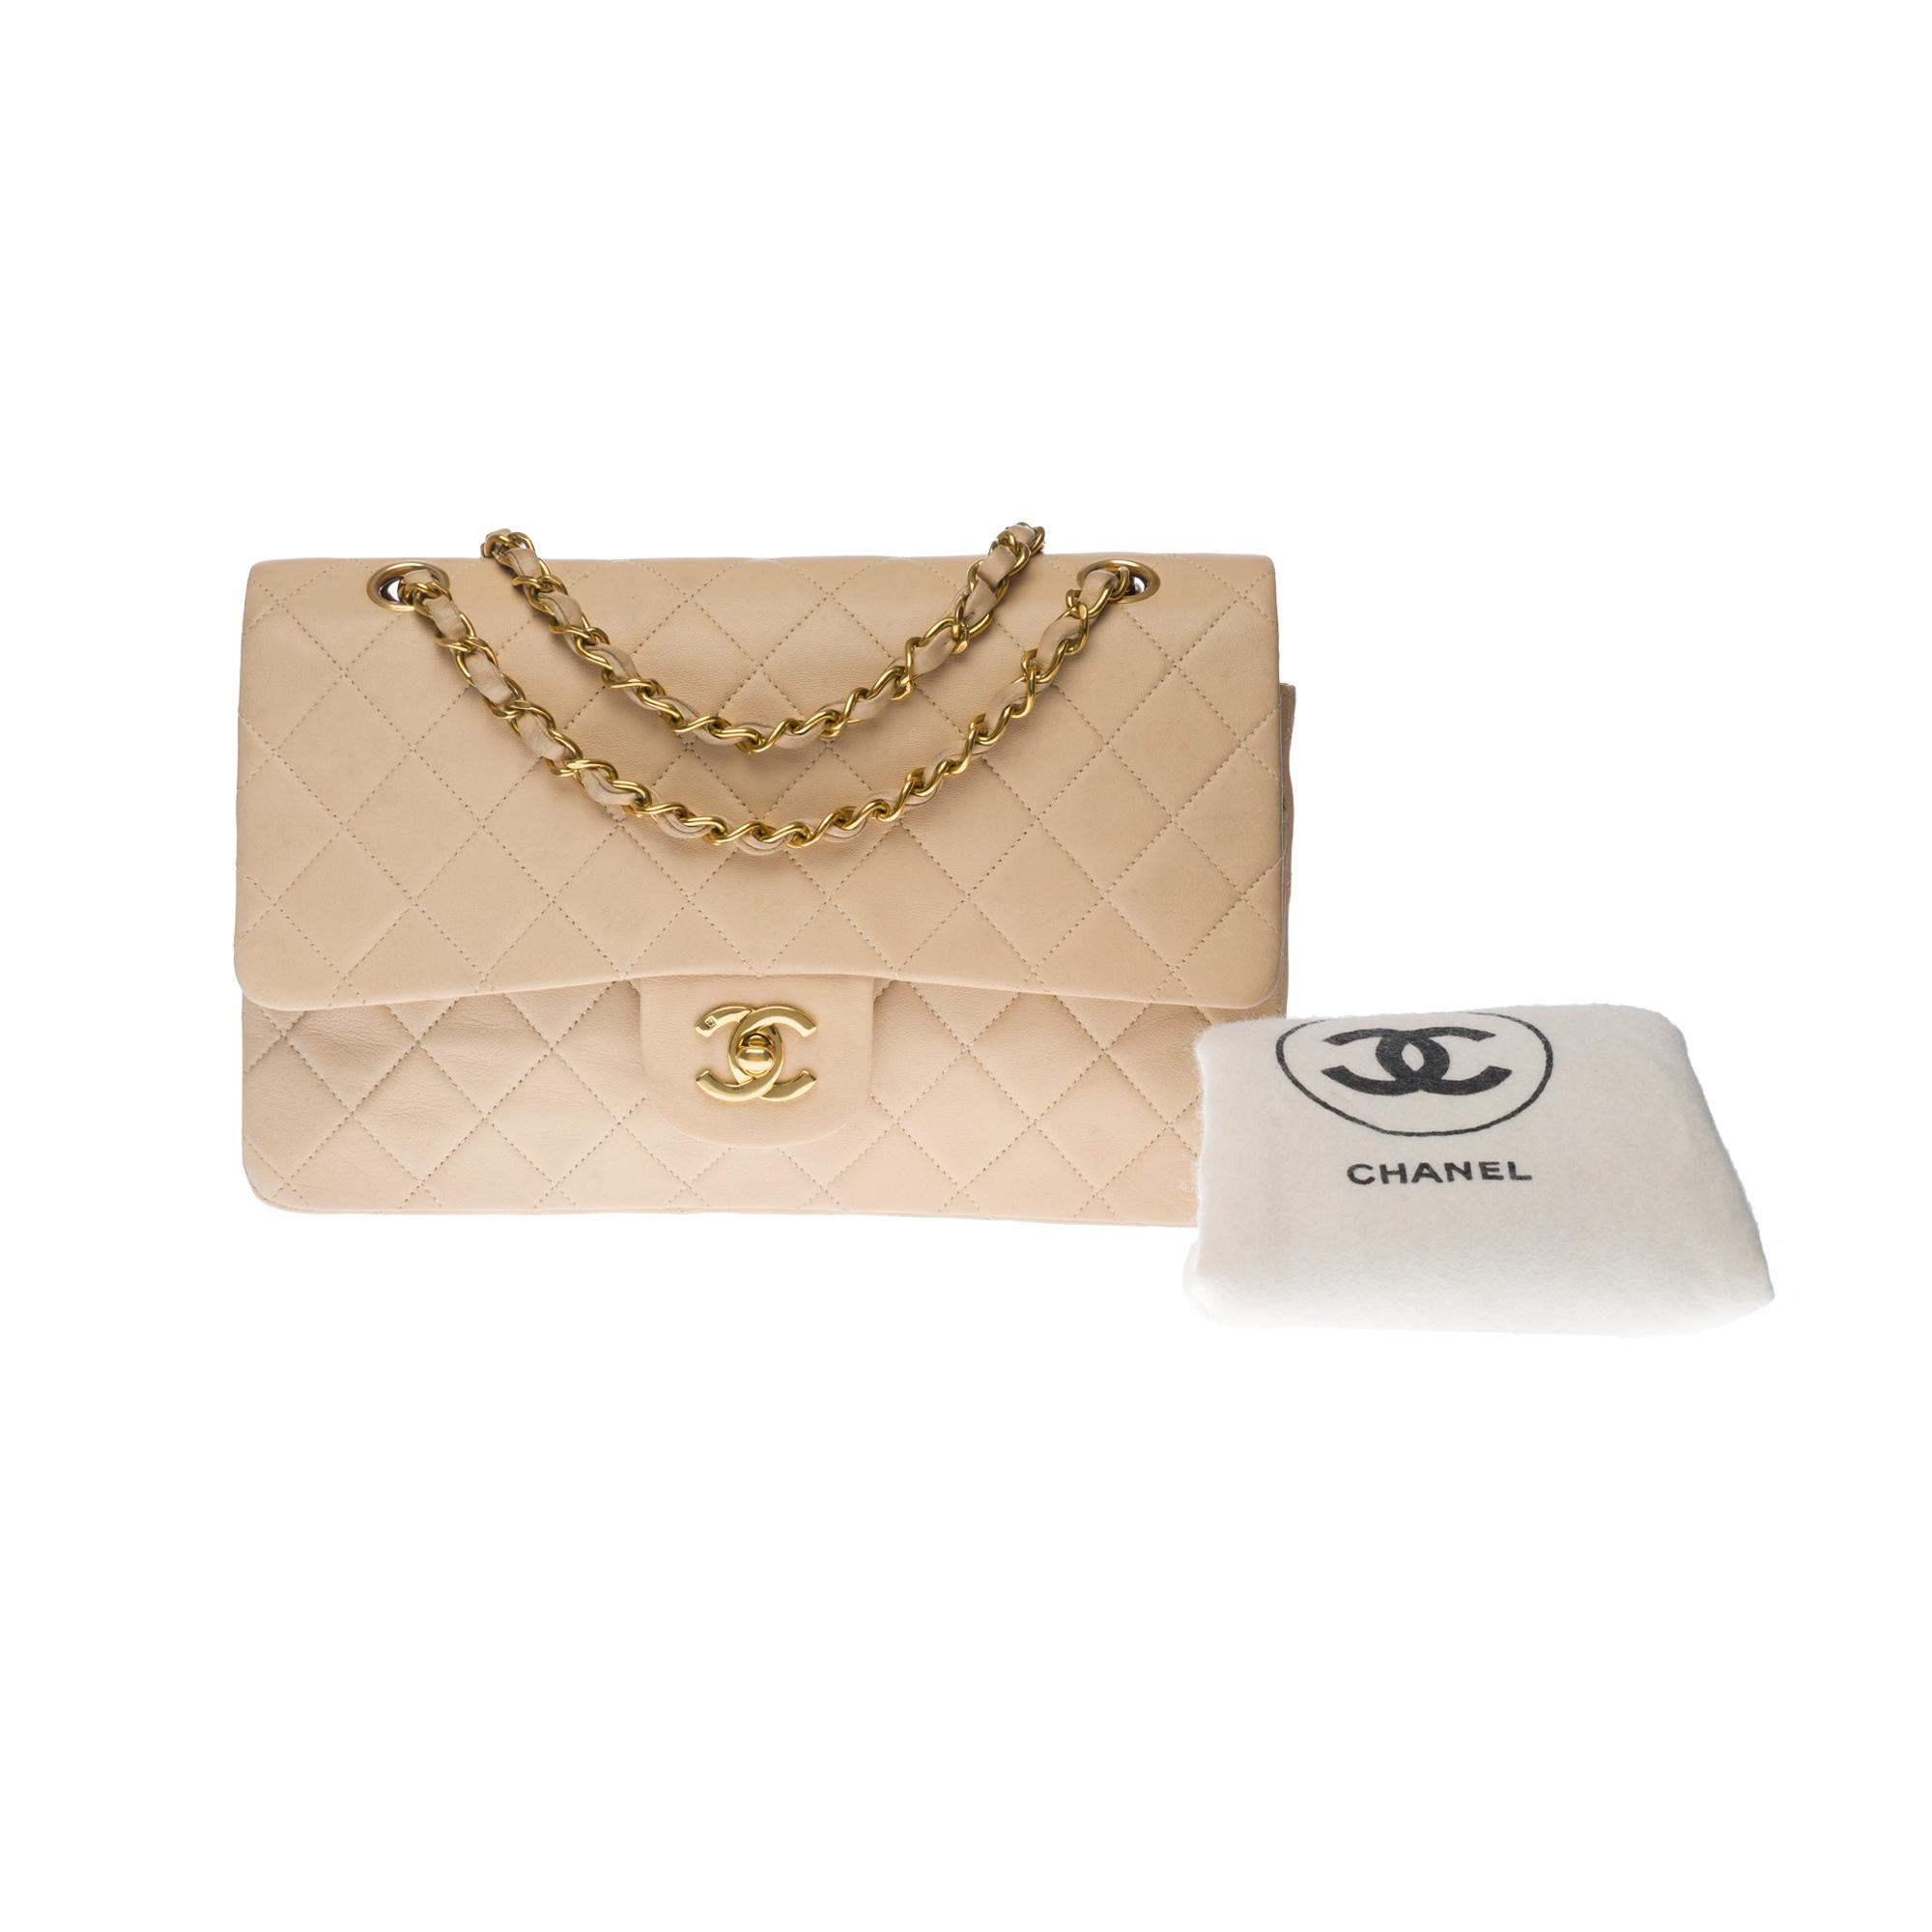 Chanel Timeless Medium double flap Shoulder bag in beige quilted leather, GHW 6